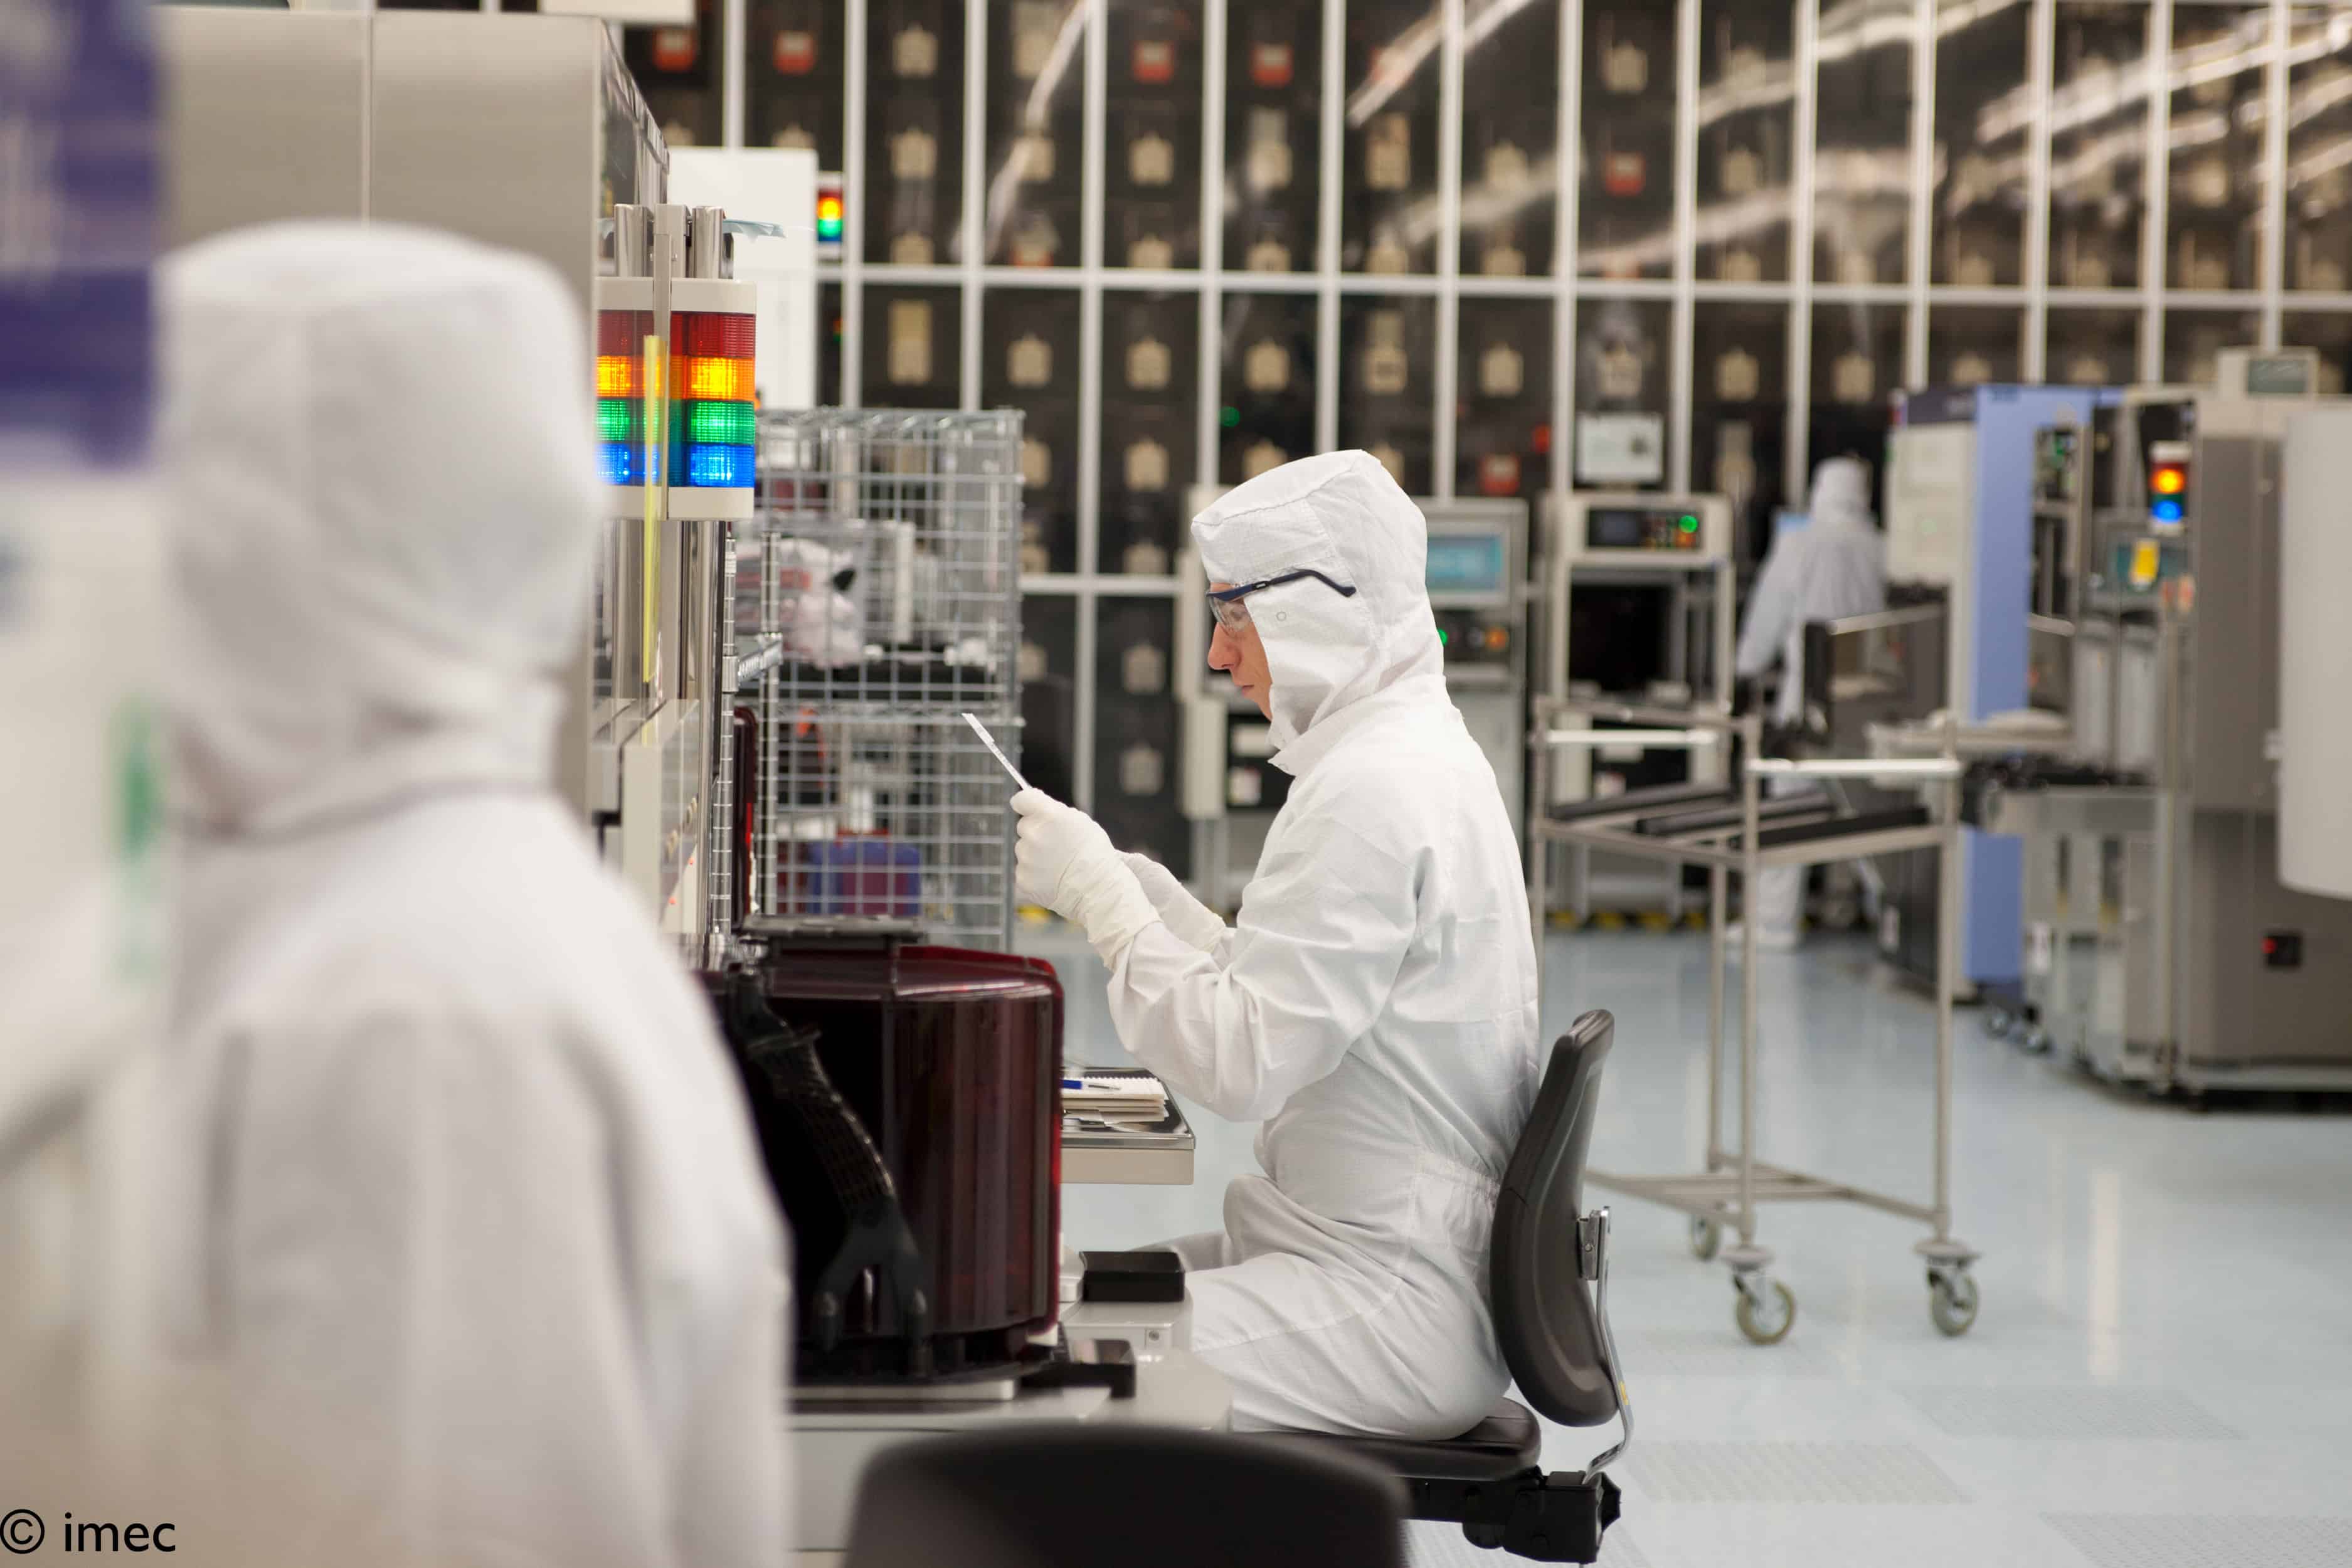 imec leads European labs into high-tech future with billion-dollar investment